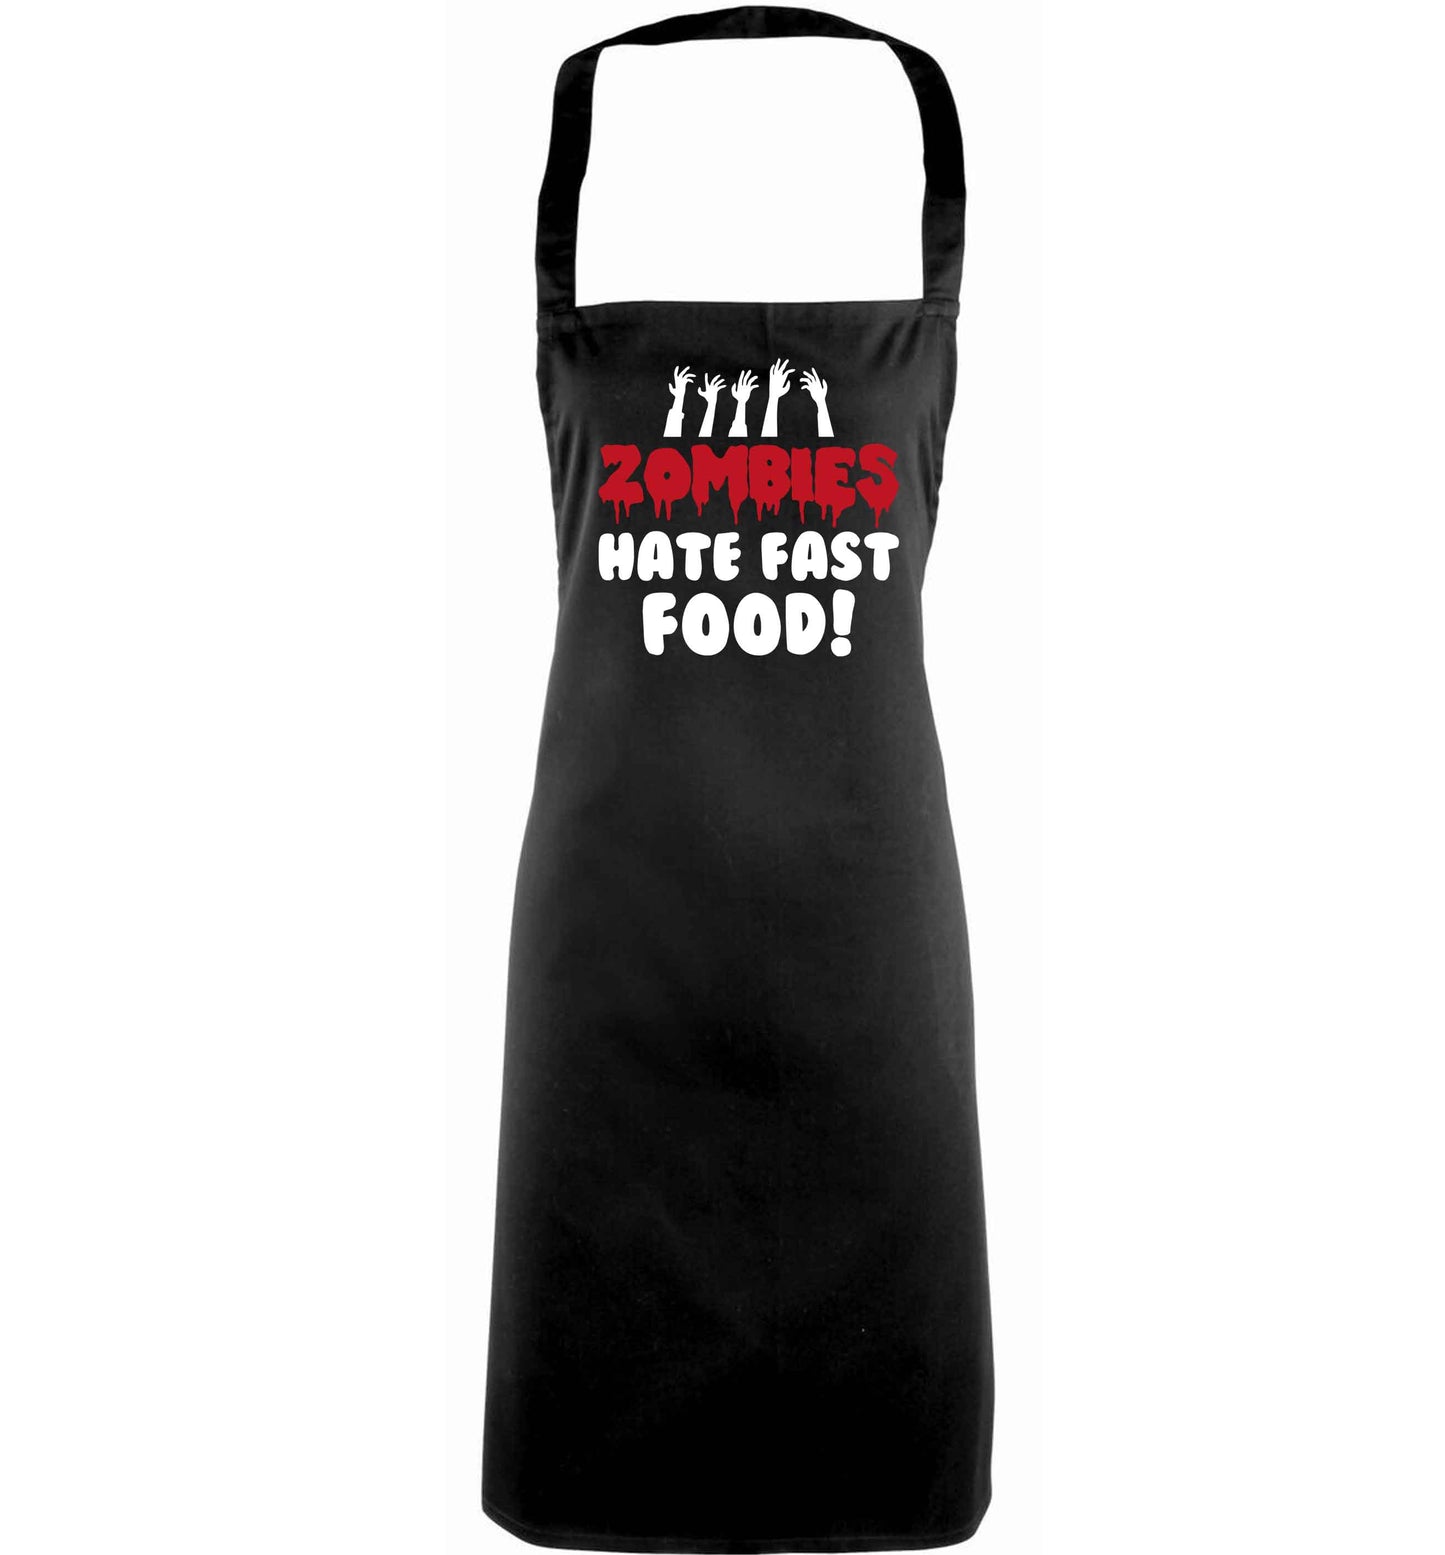 Zombies hate fast food adults black apron